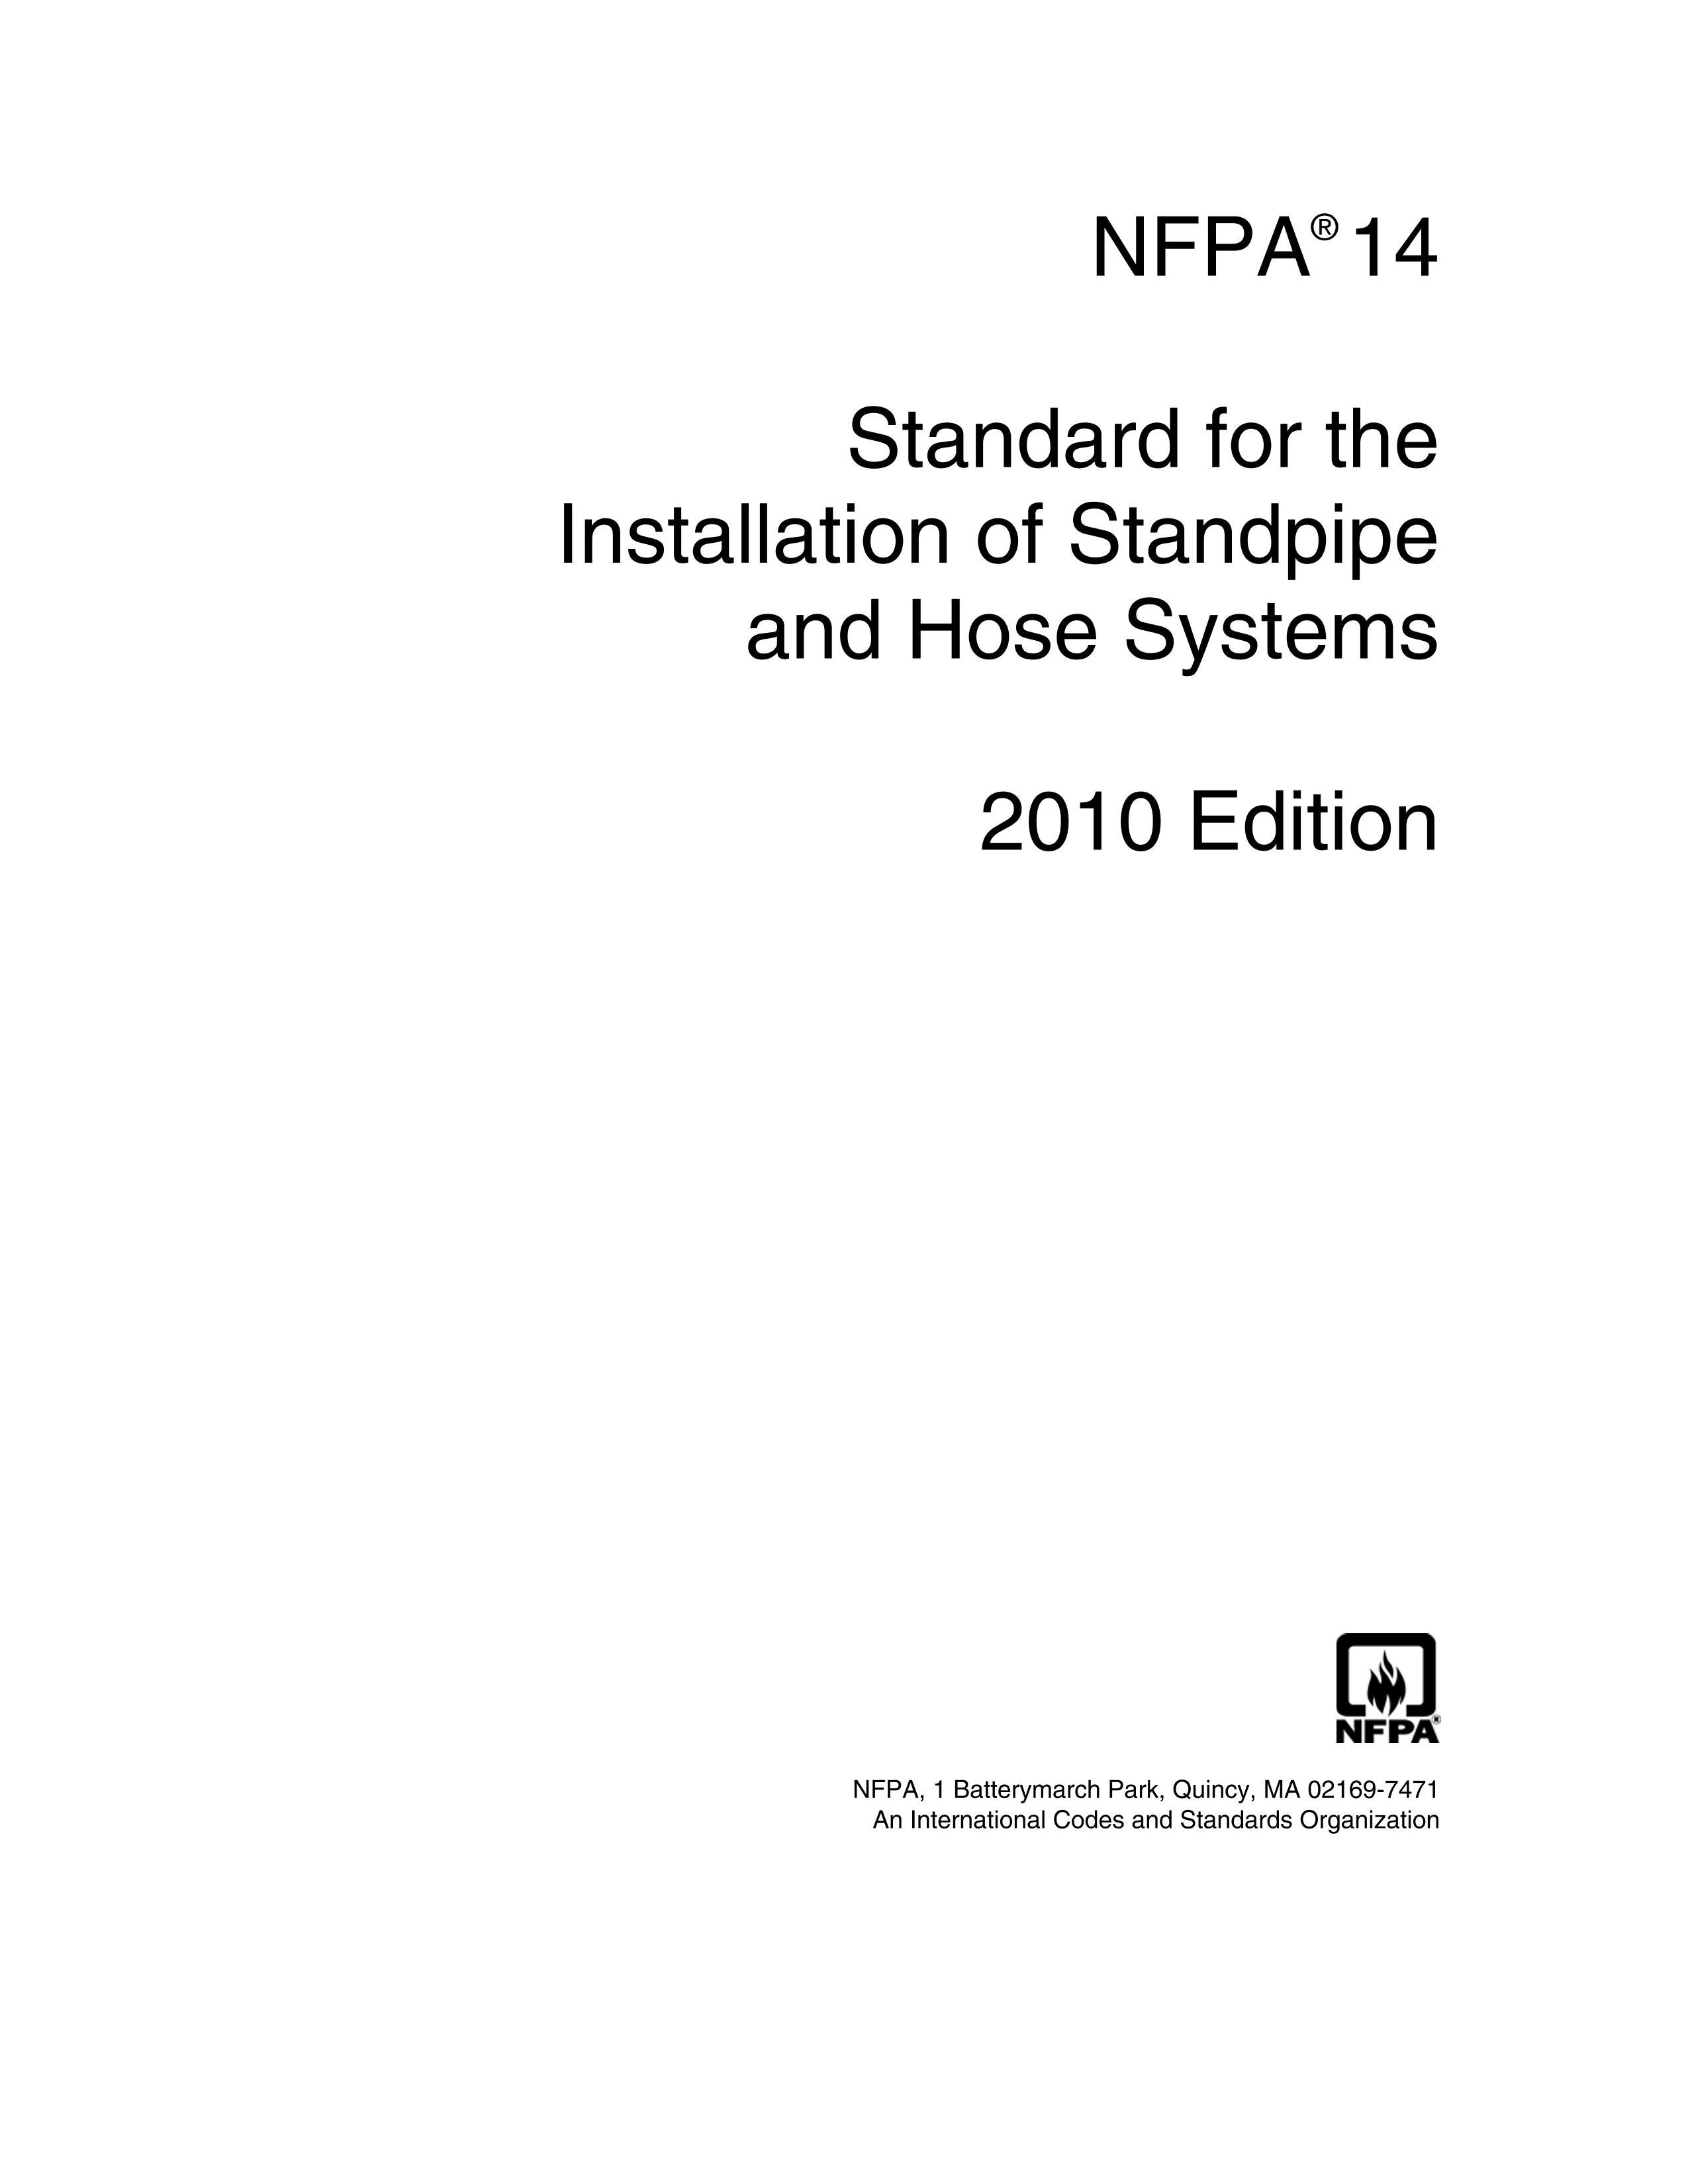 NFPA 14-2010 Standard for the Installation of Standpipe and Hose Systems.pdf1ҳ